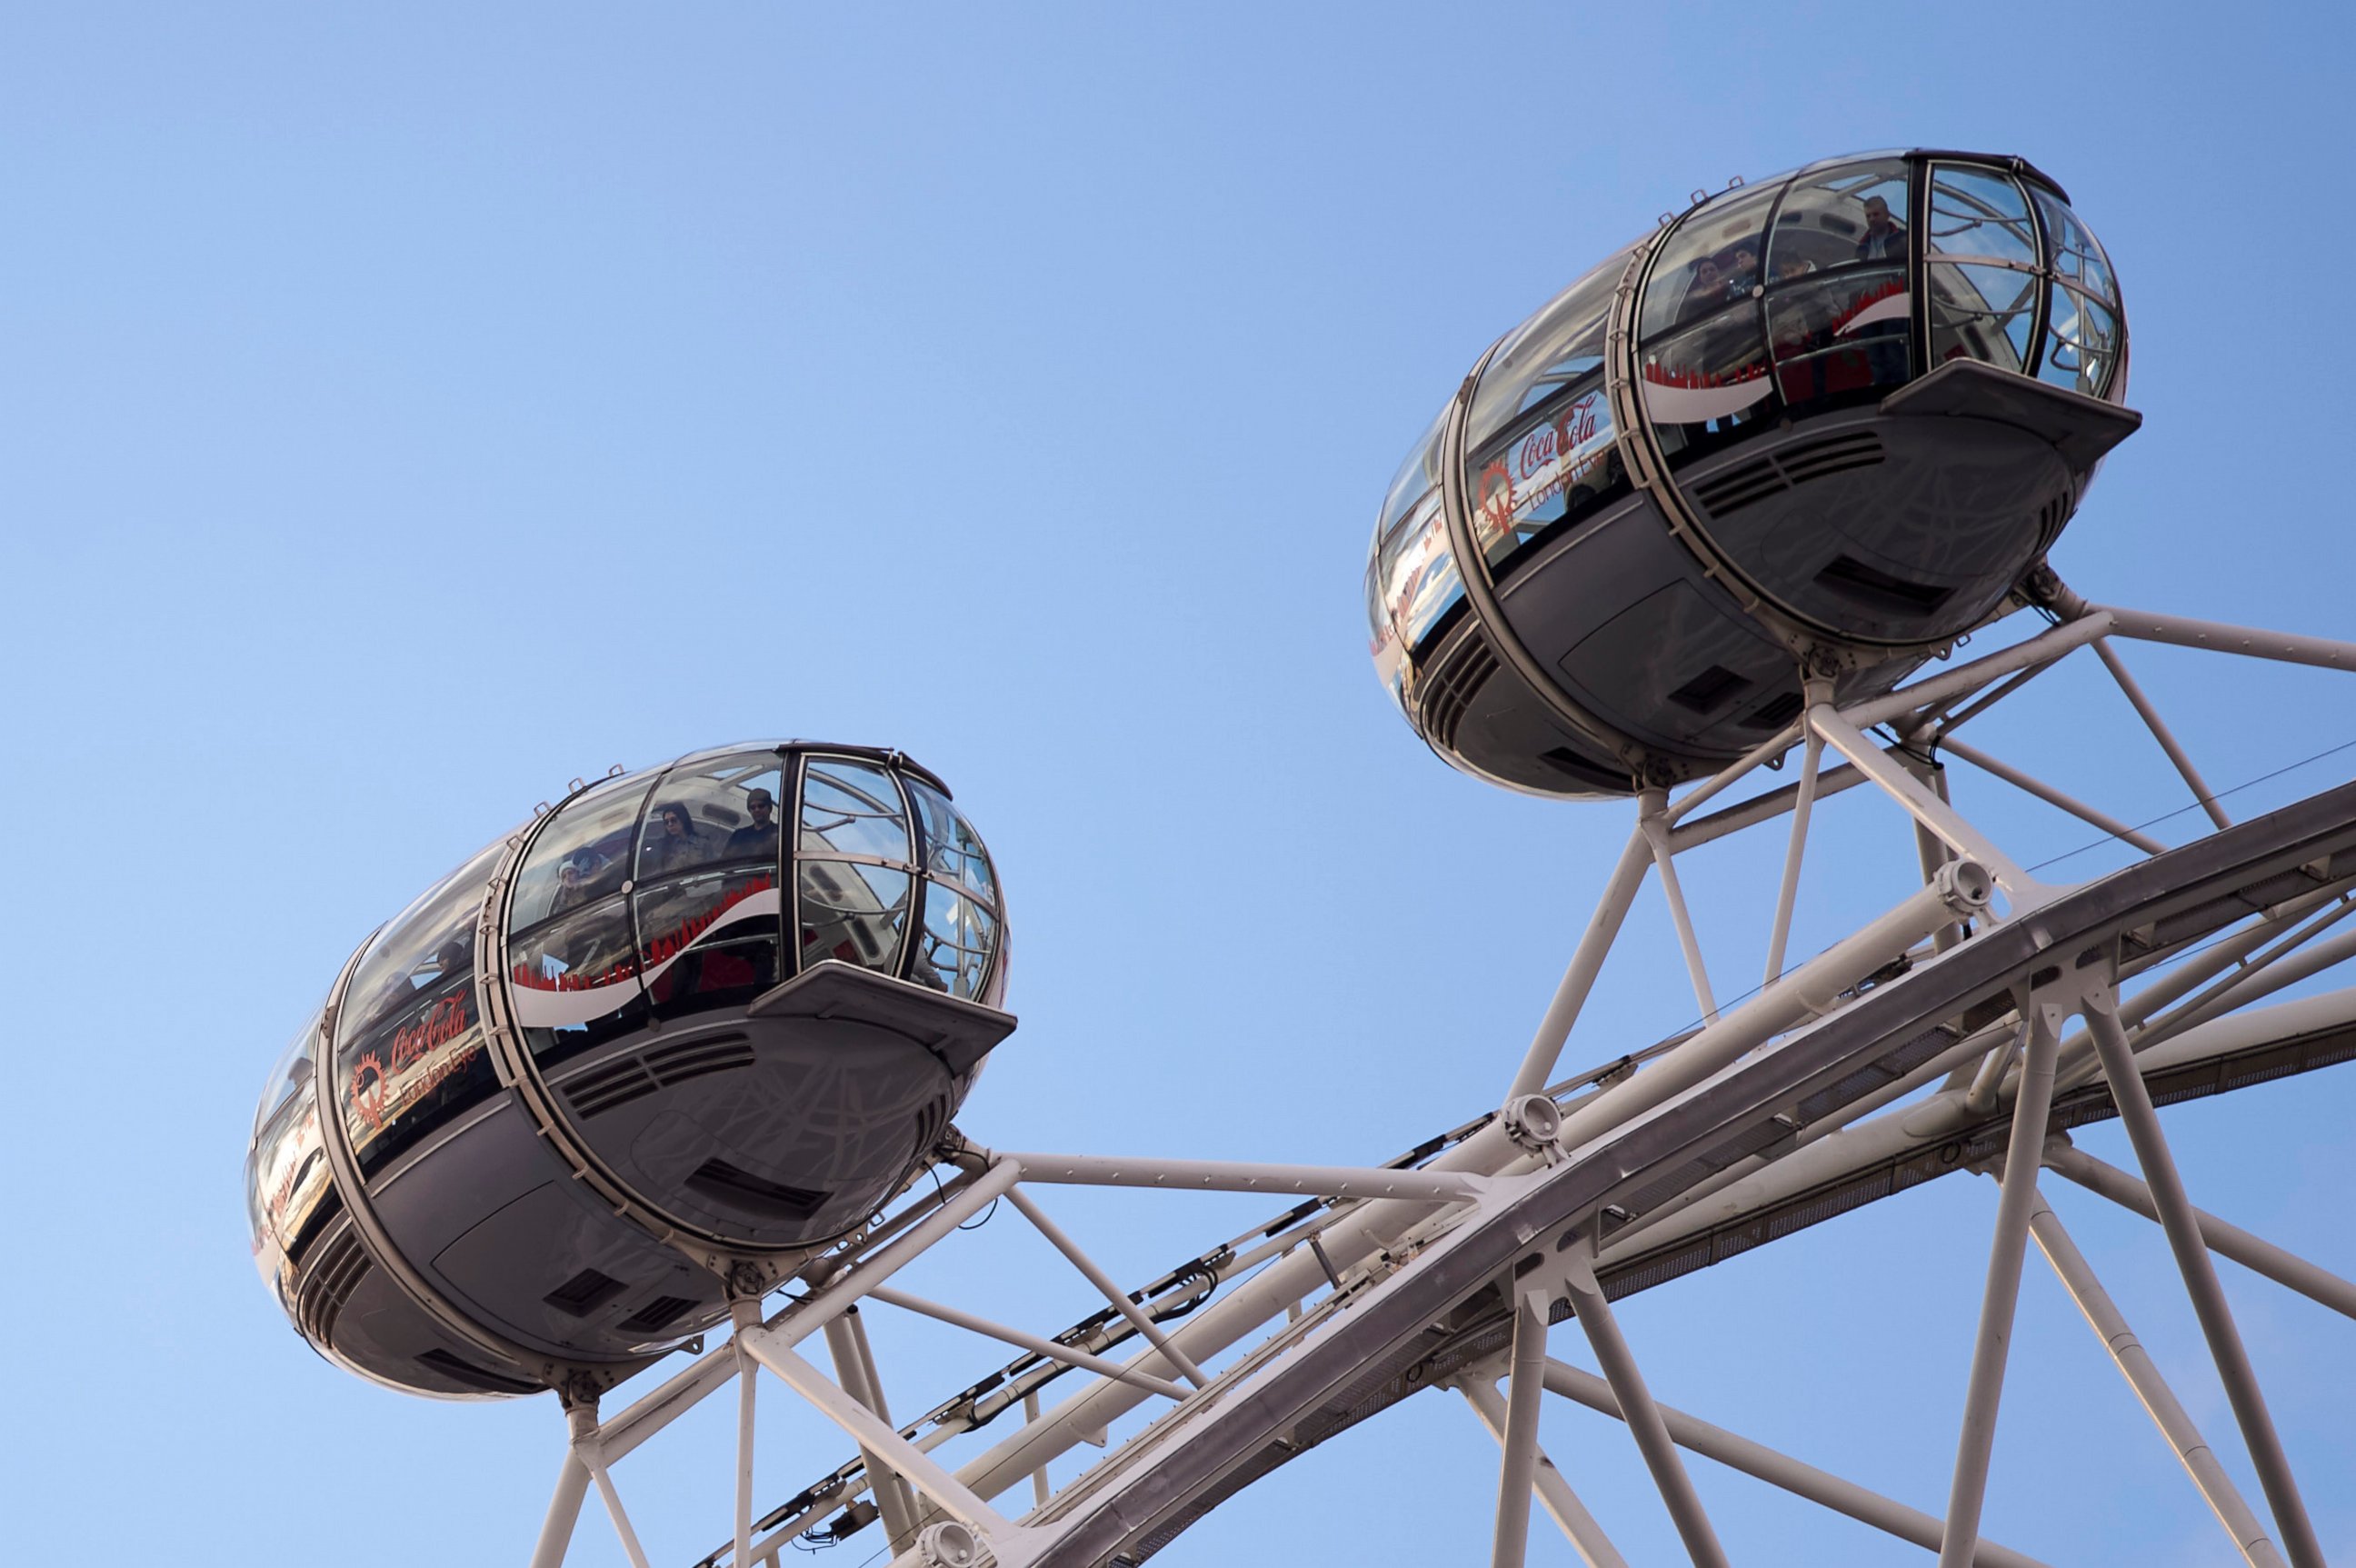 PHOTO: People are seen inside the pods of the London Eye opposite the Houses of Parliament after an incident in central London on March 22, 2017.